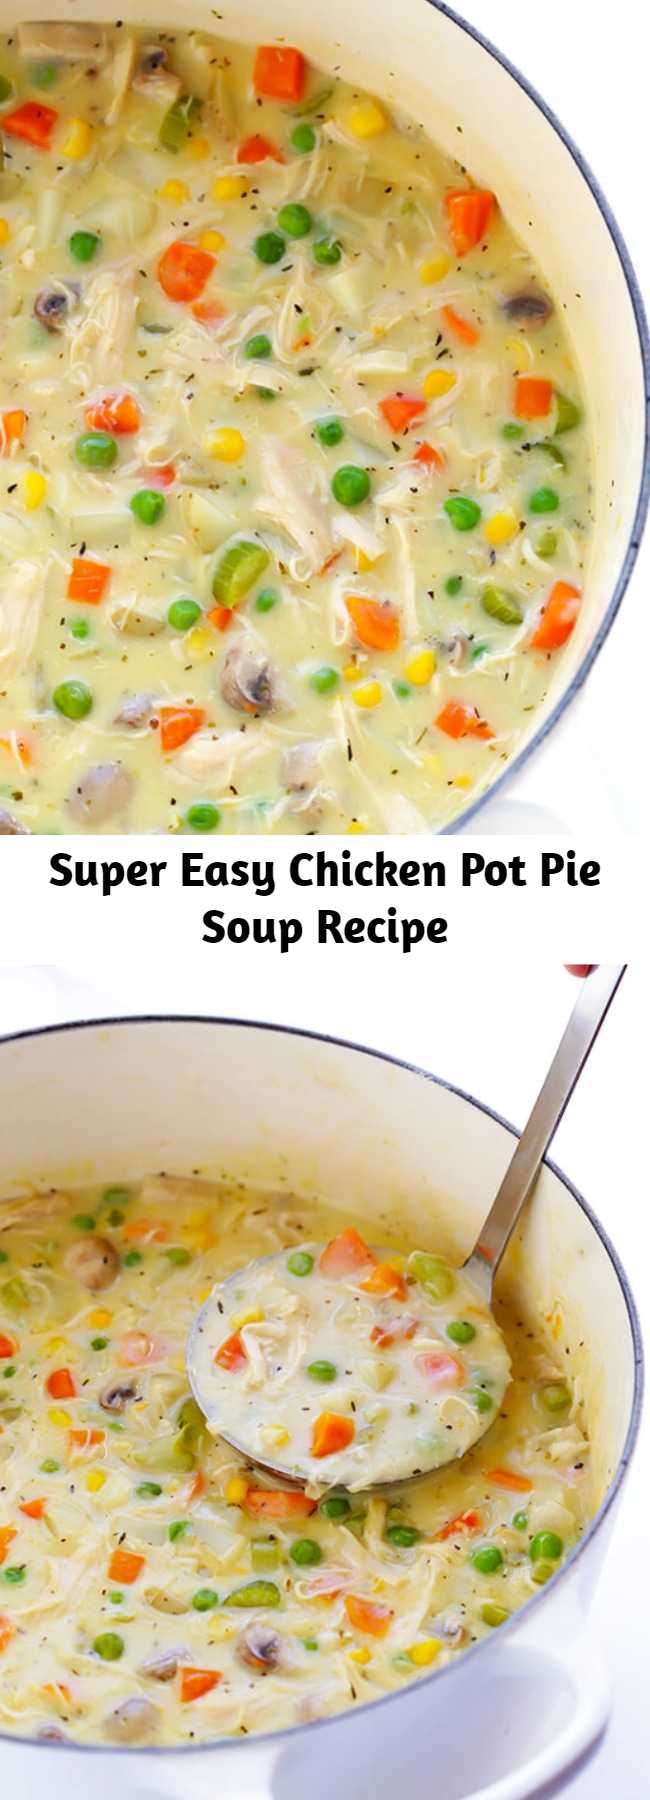 Super Easy Chicken Pot Pie Soup Recipe - This Chicken Pot Pie Soup recipe is simple to make, lightened up with a few easy tweaks, and deliciously rich and creamy.